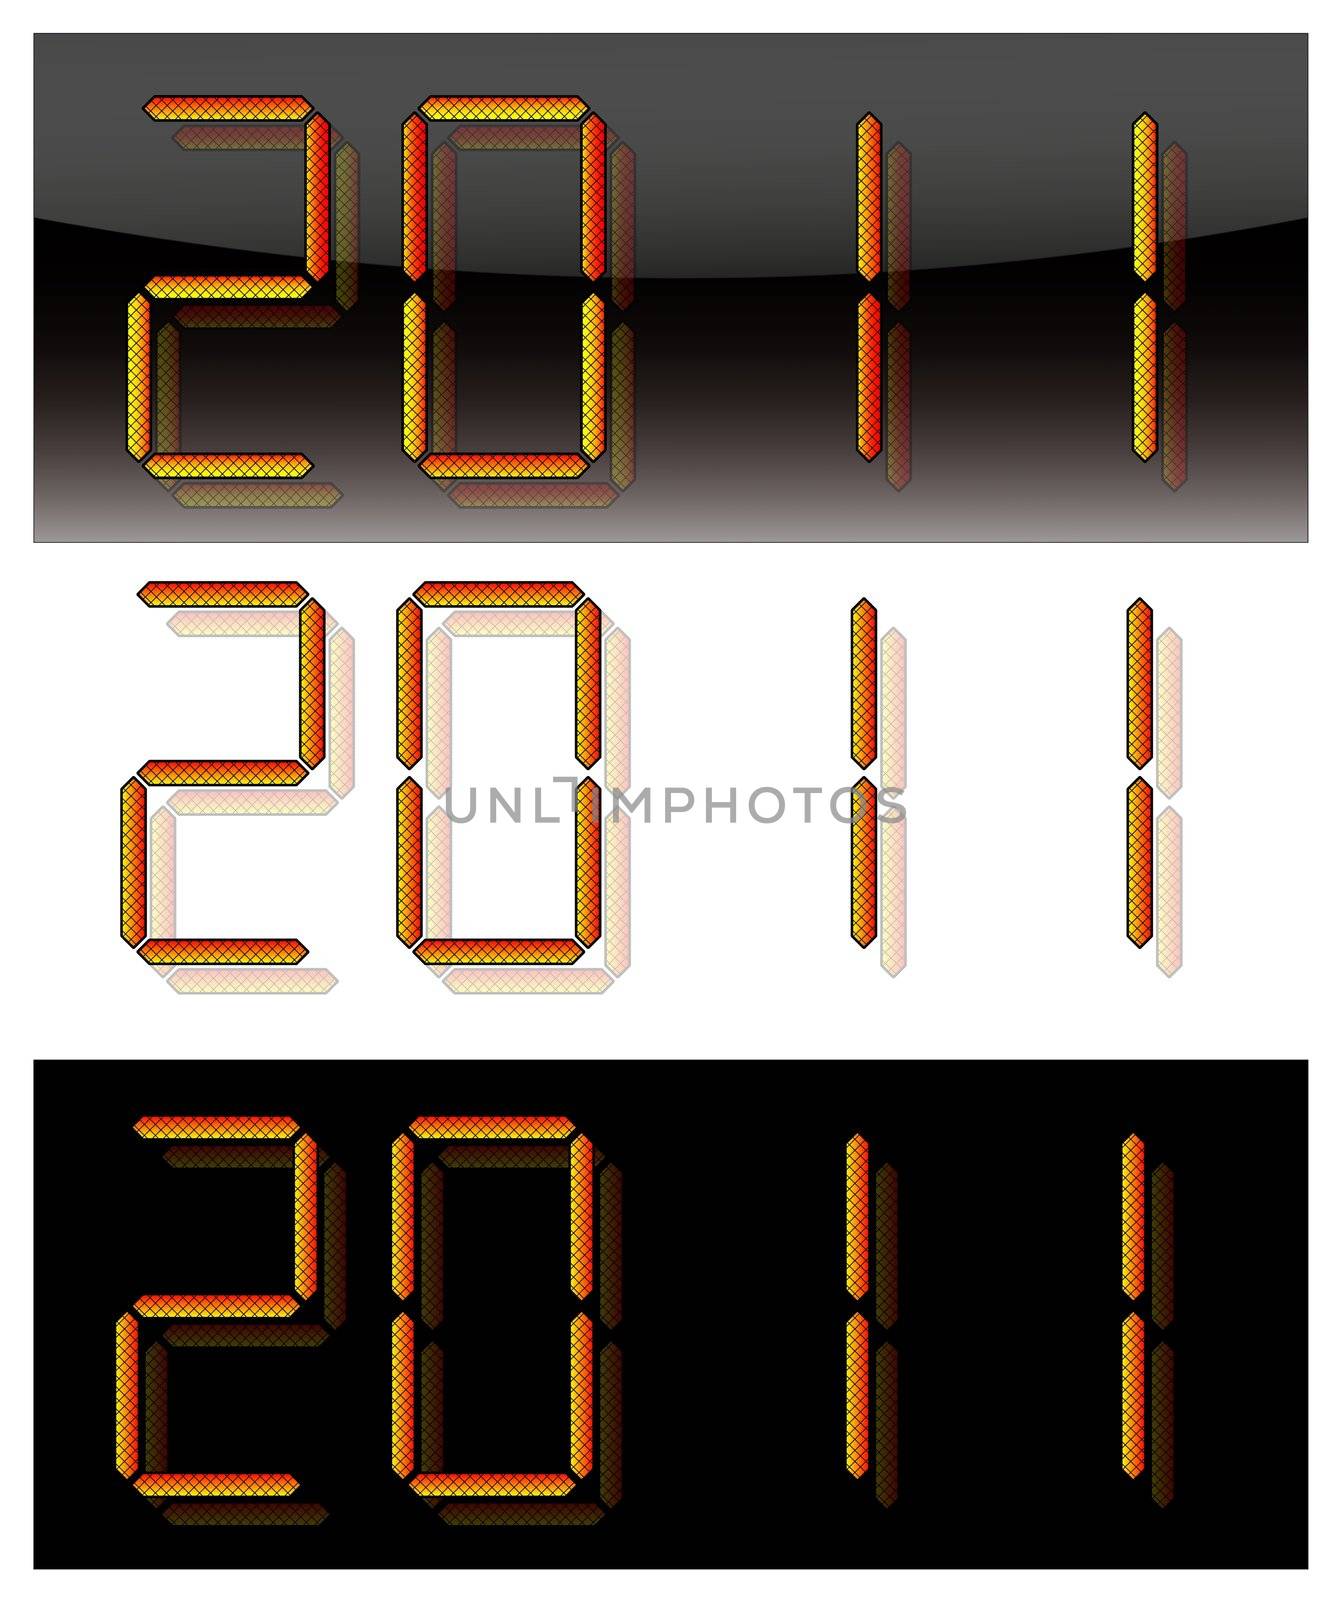 2011 digits by tomatto